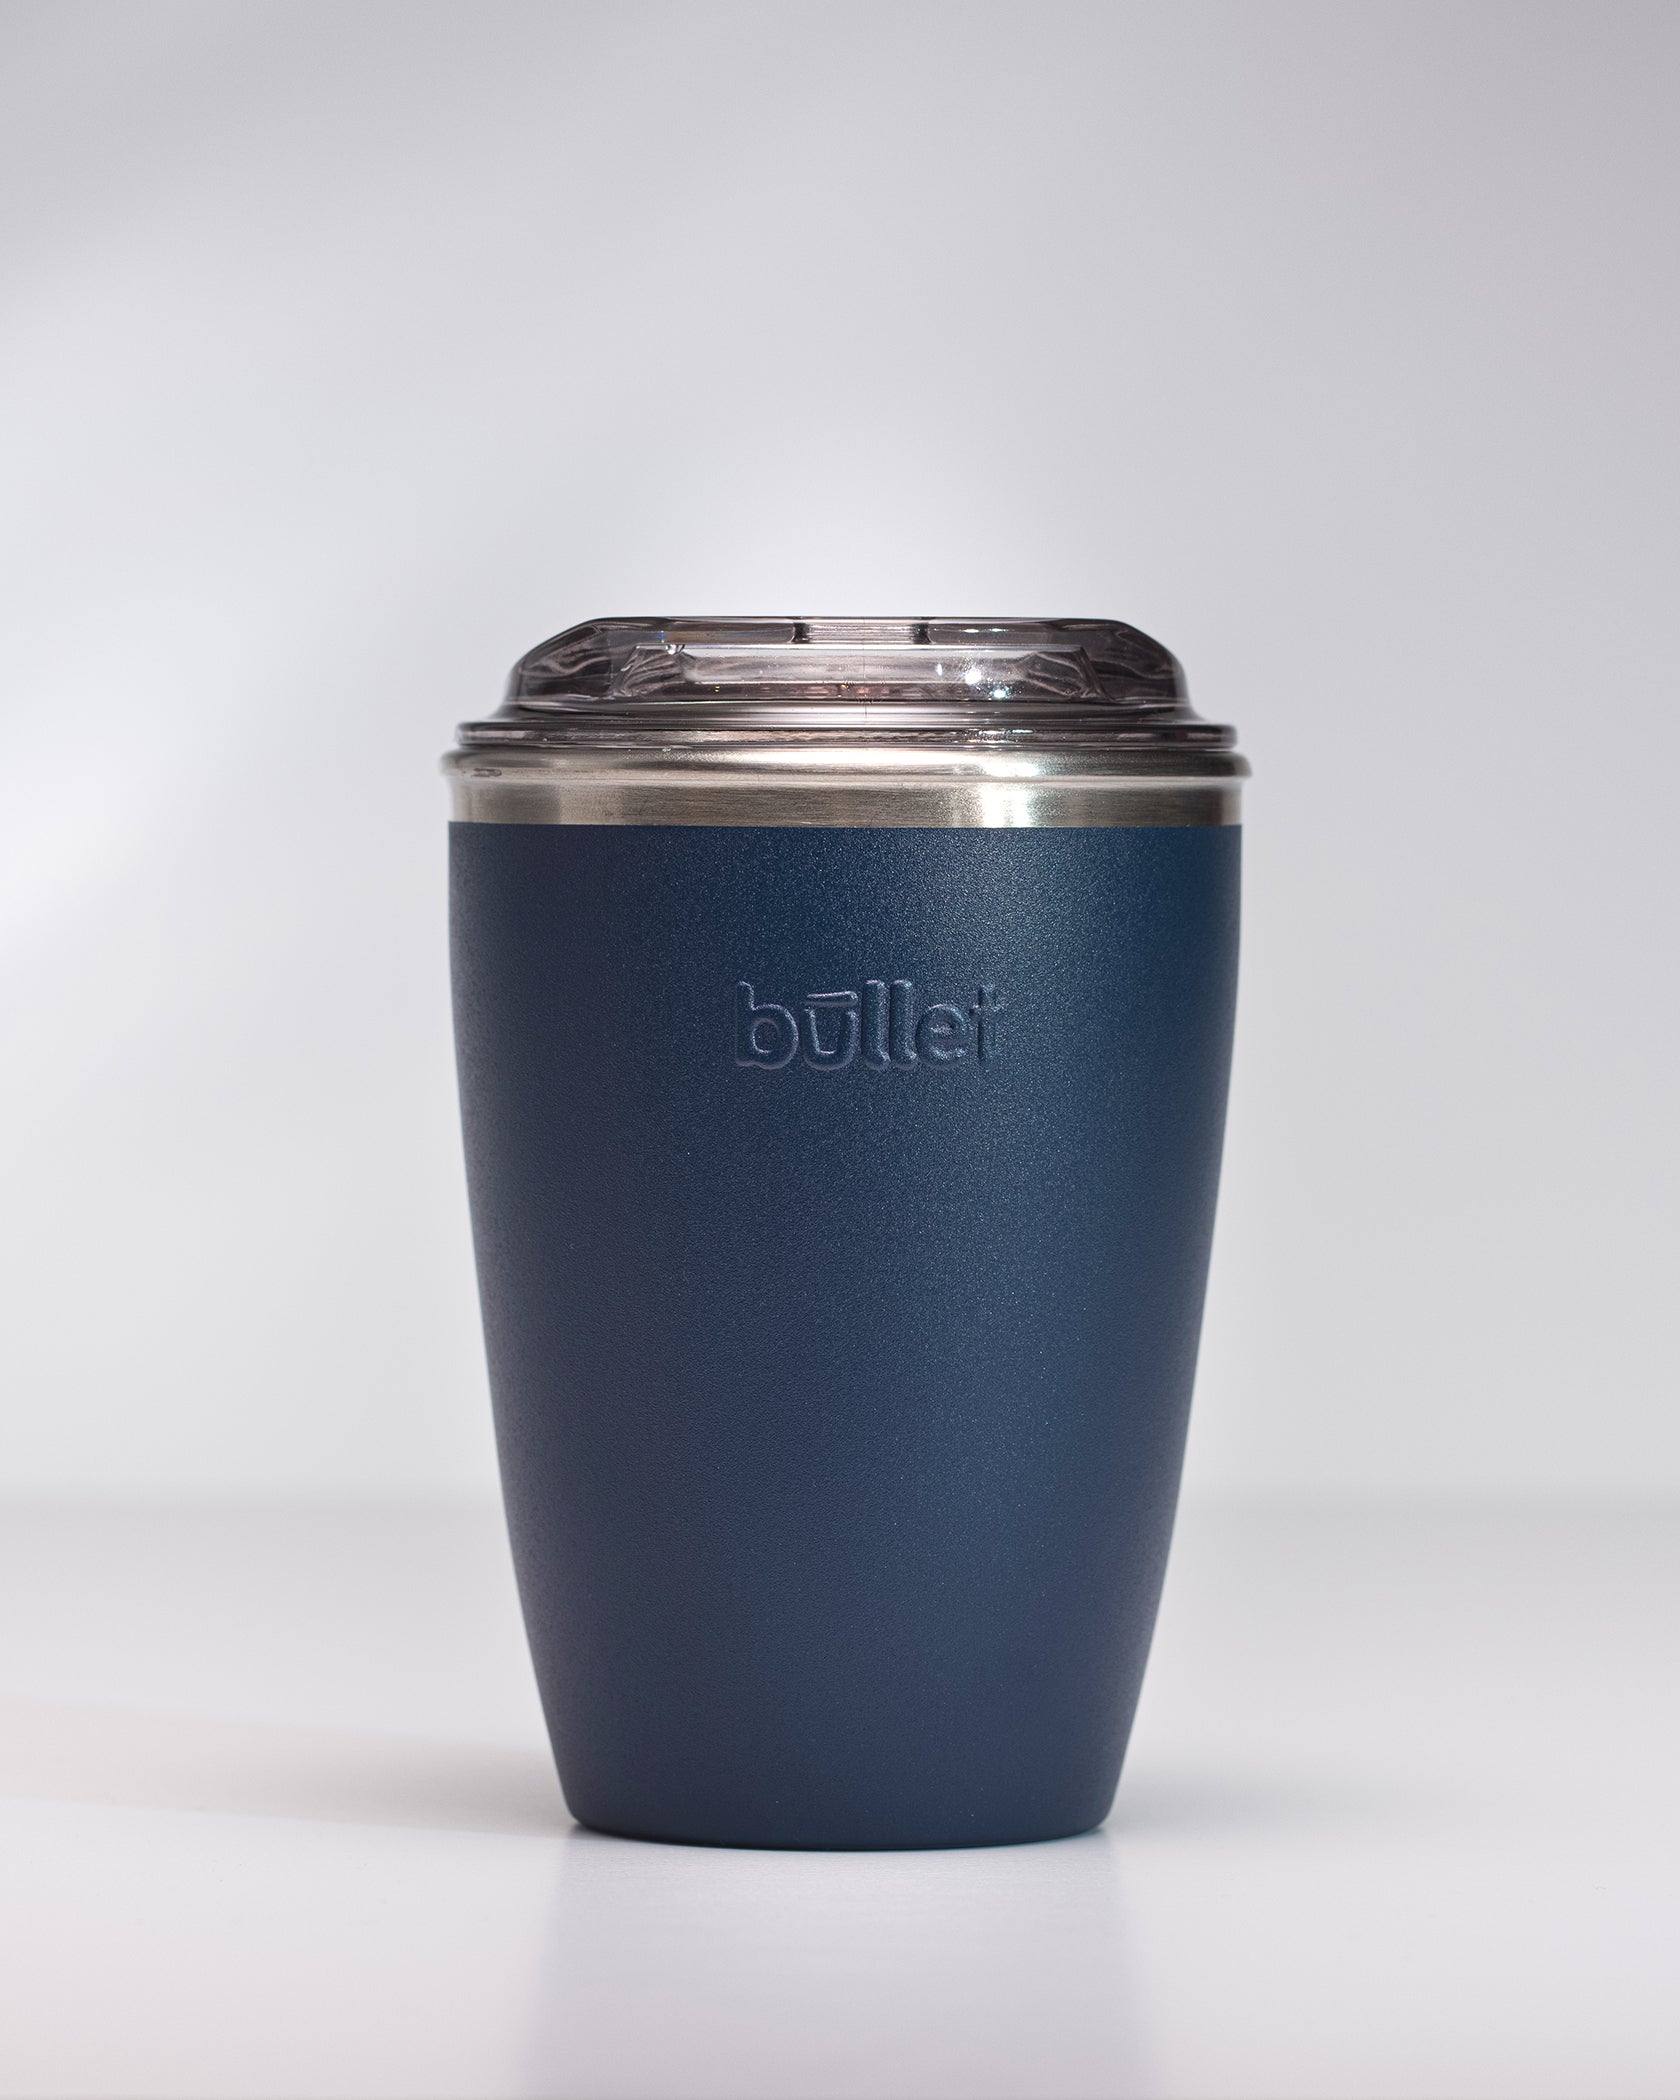 8oz blue stainless steel reusable coffee cup